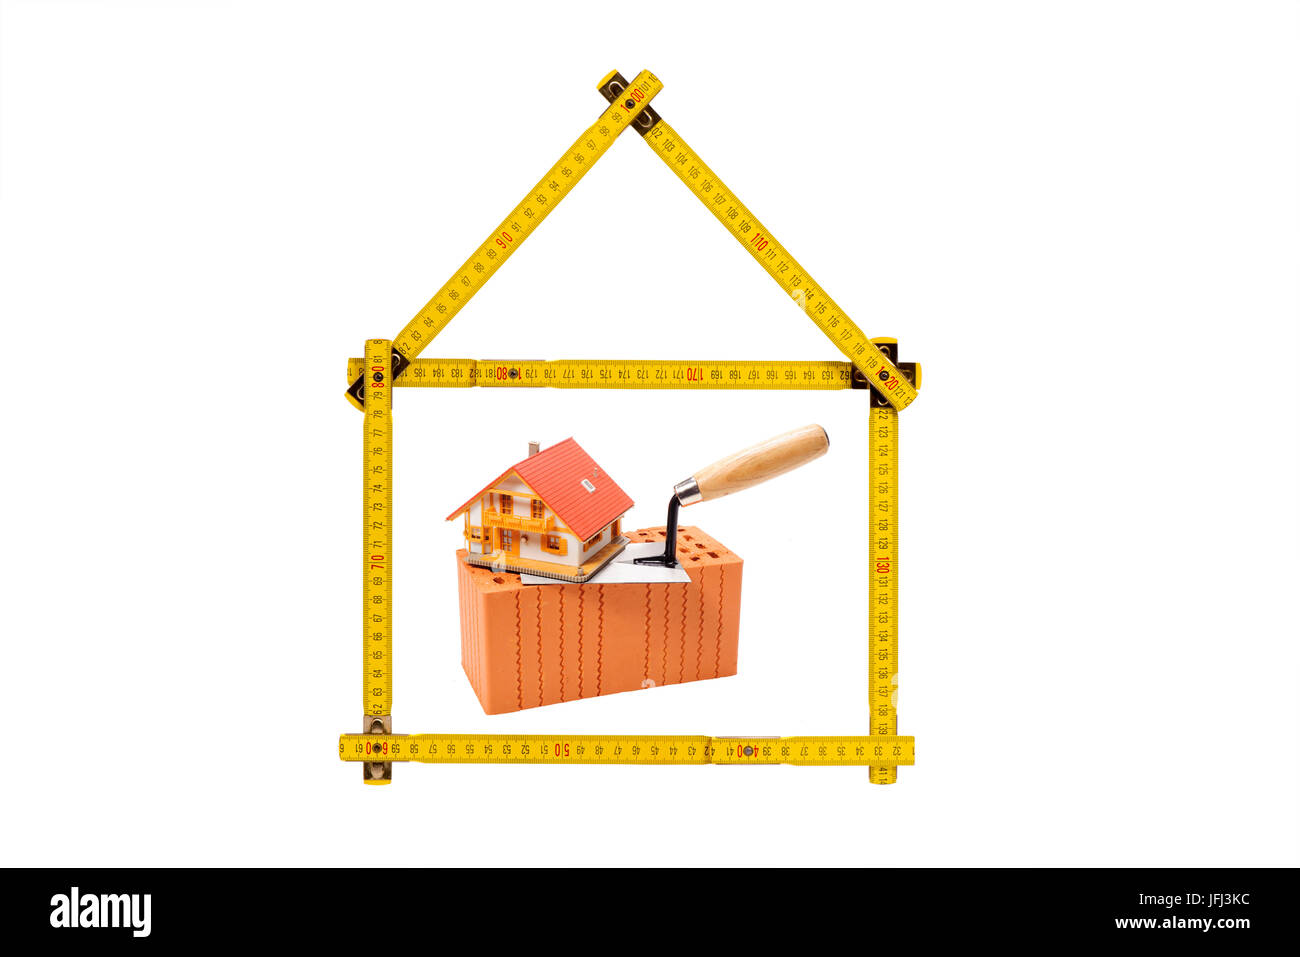 House from yard stick with clay brick as an icon for construction industry Stock Photo